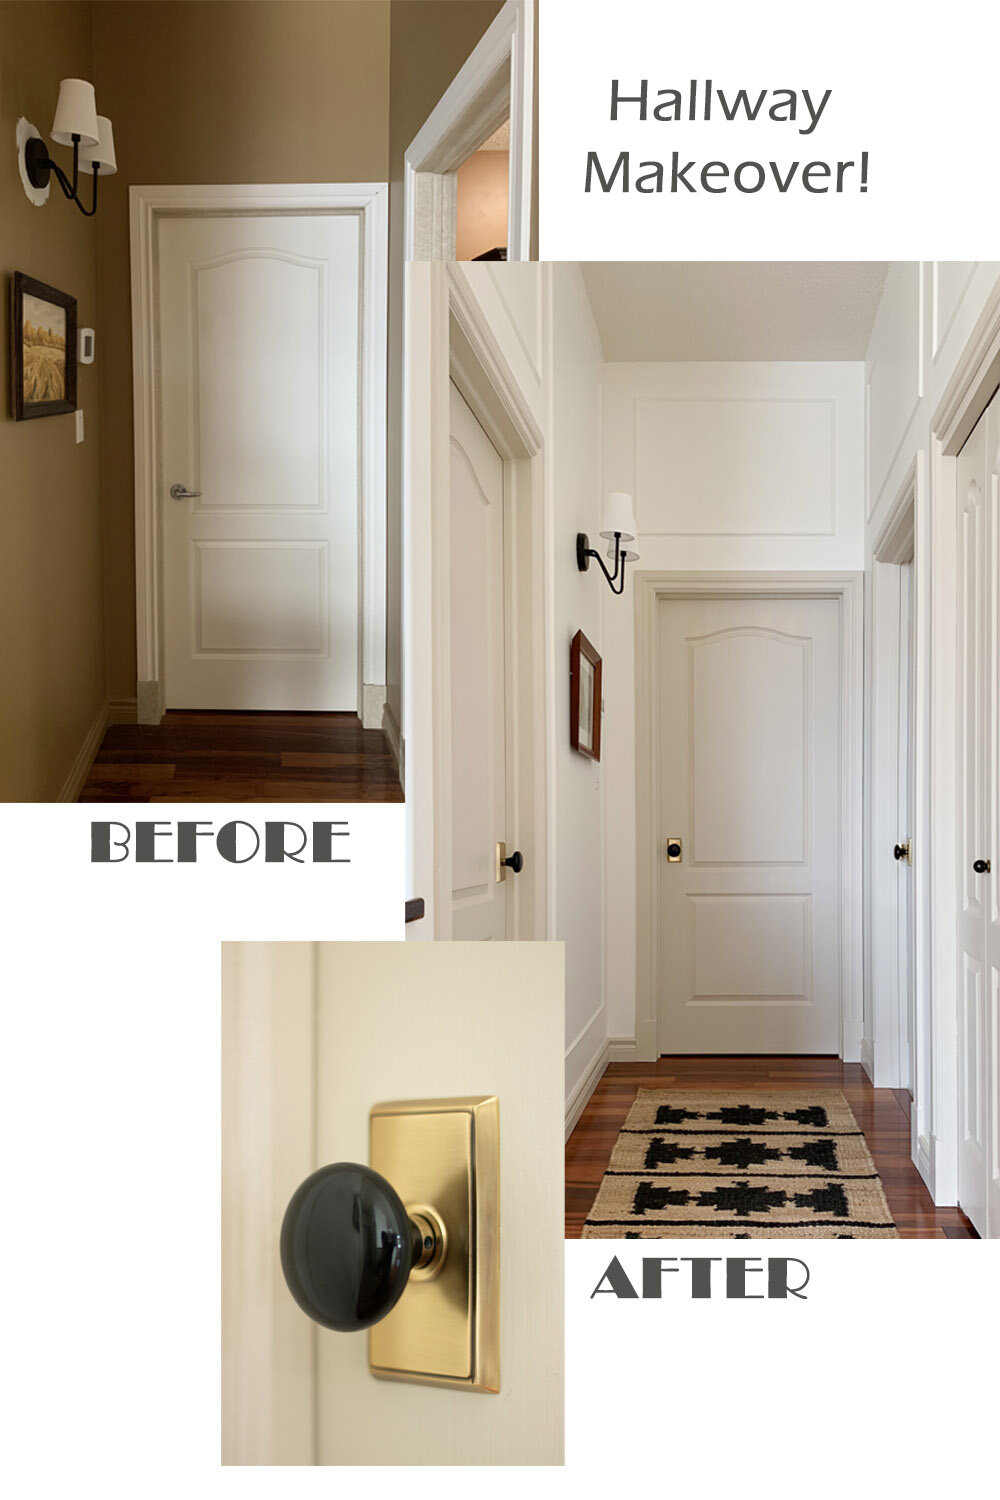 before and after of hallway after painting, adding moulding and new knobs